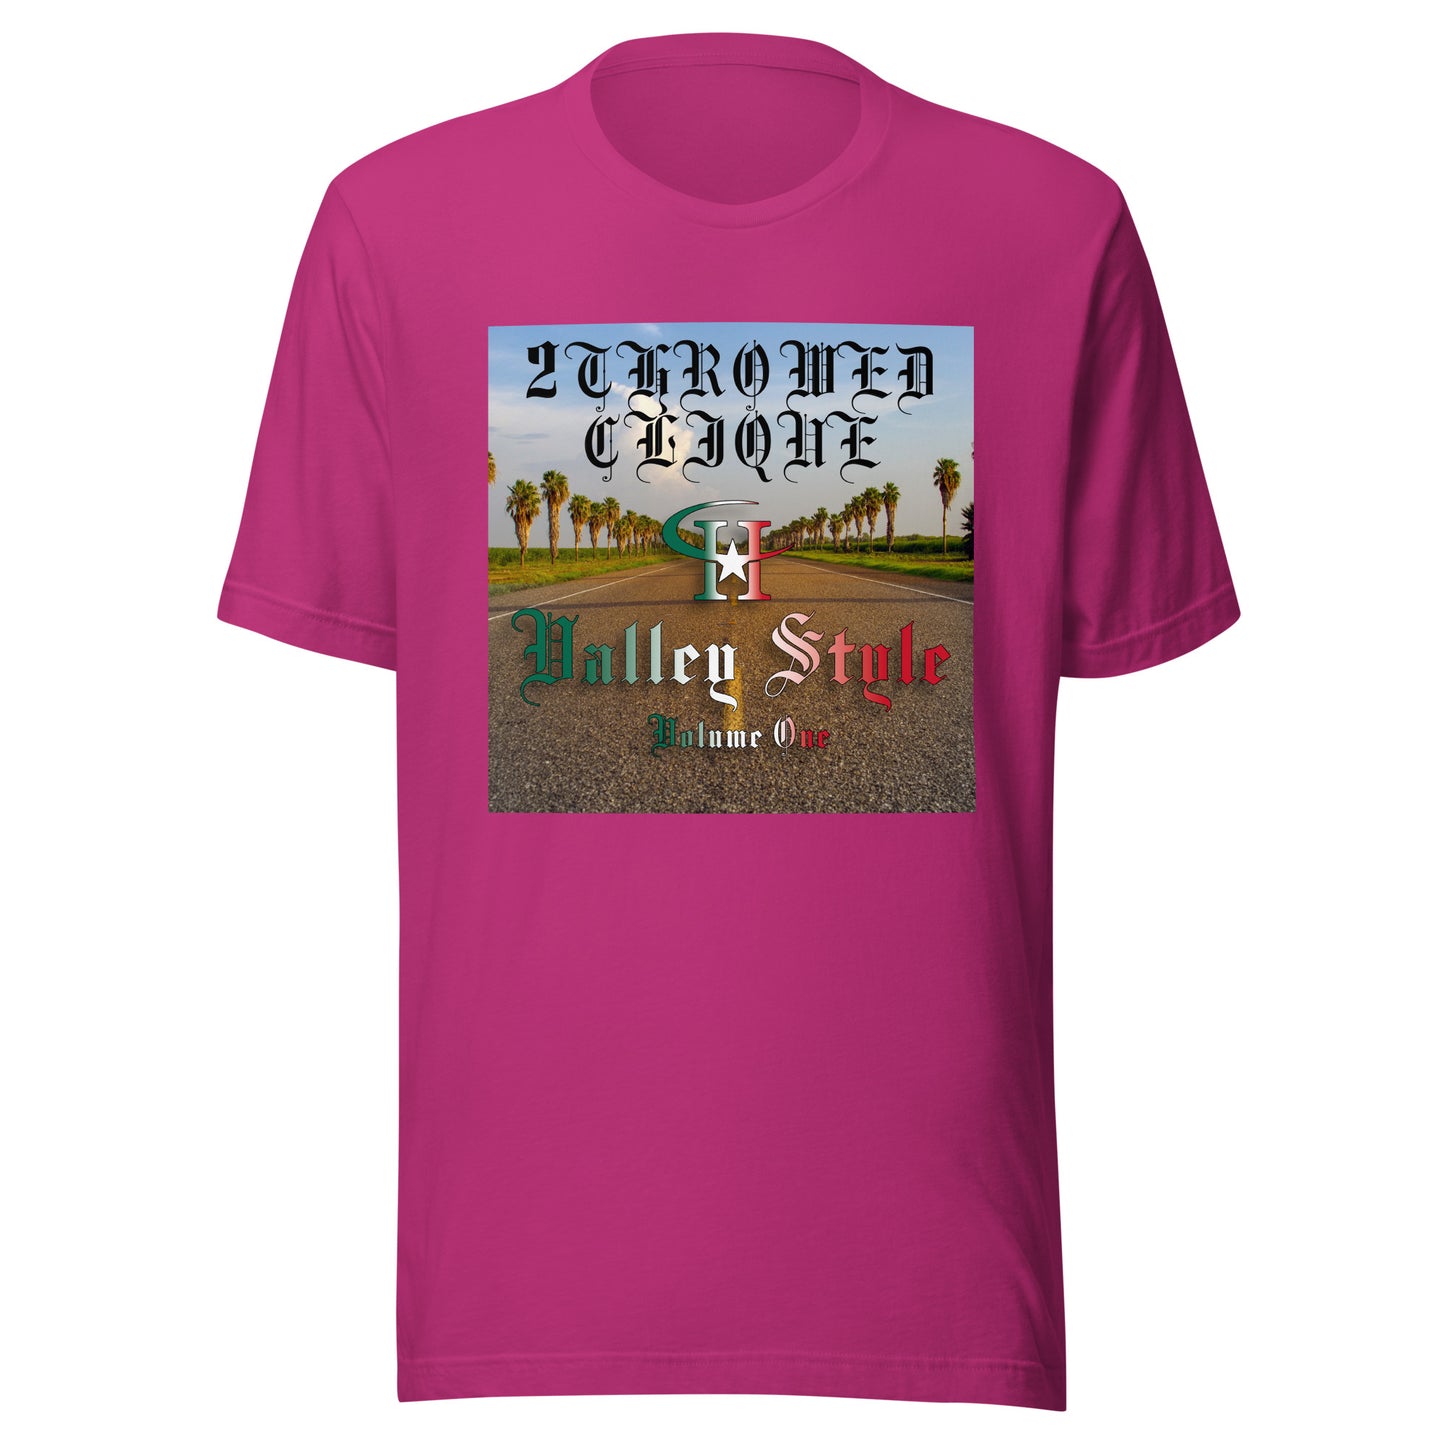 2 Throwed Clique - Valley Style Vol. 1 T-Shirt